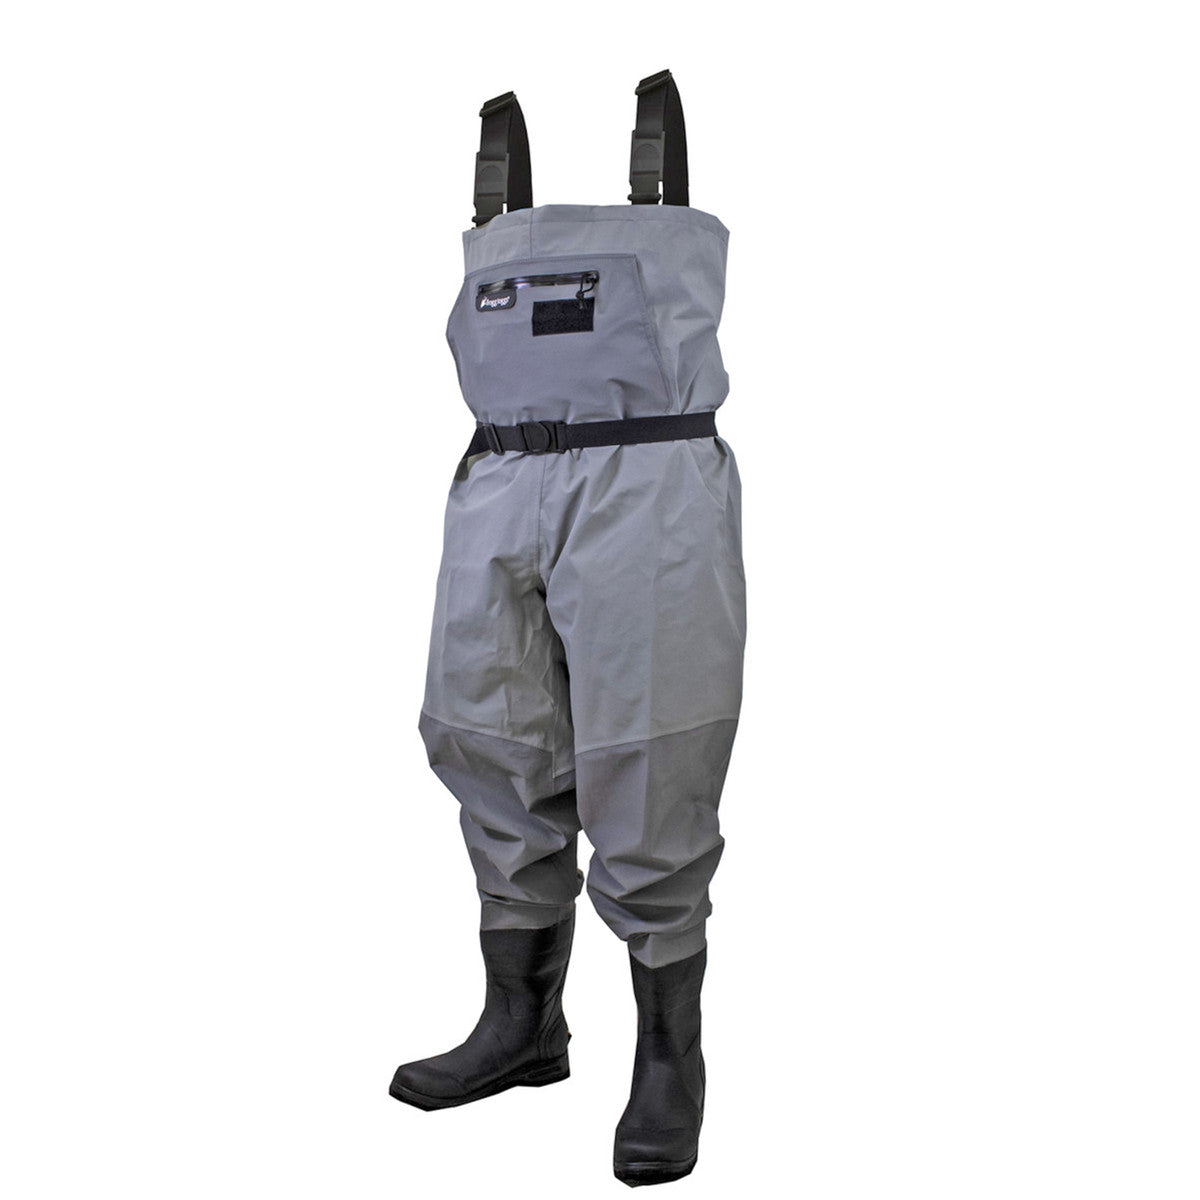 Frogg Toggs - HellBender Pro Bootfoot Lug Sole Chest Wader